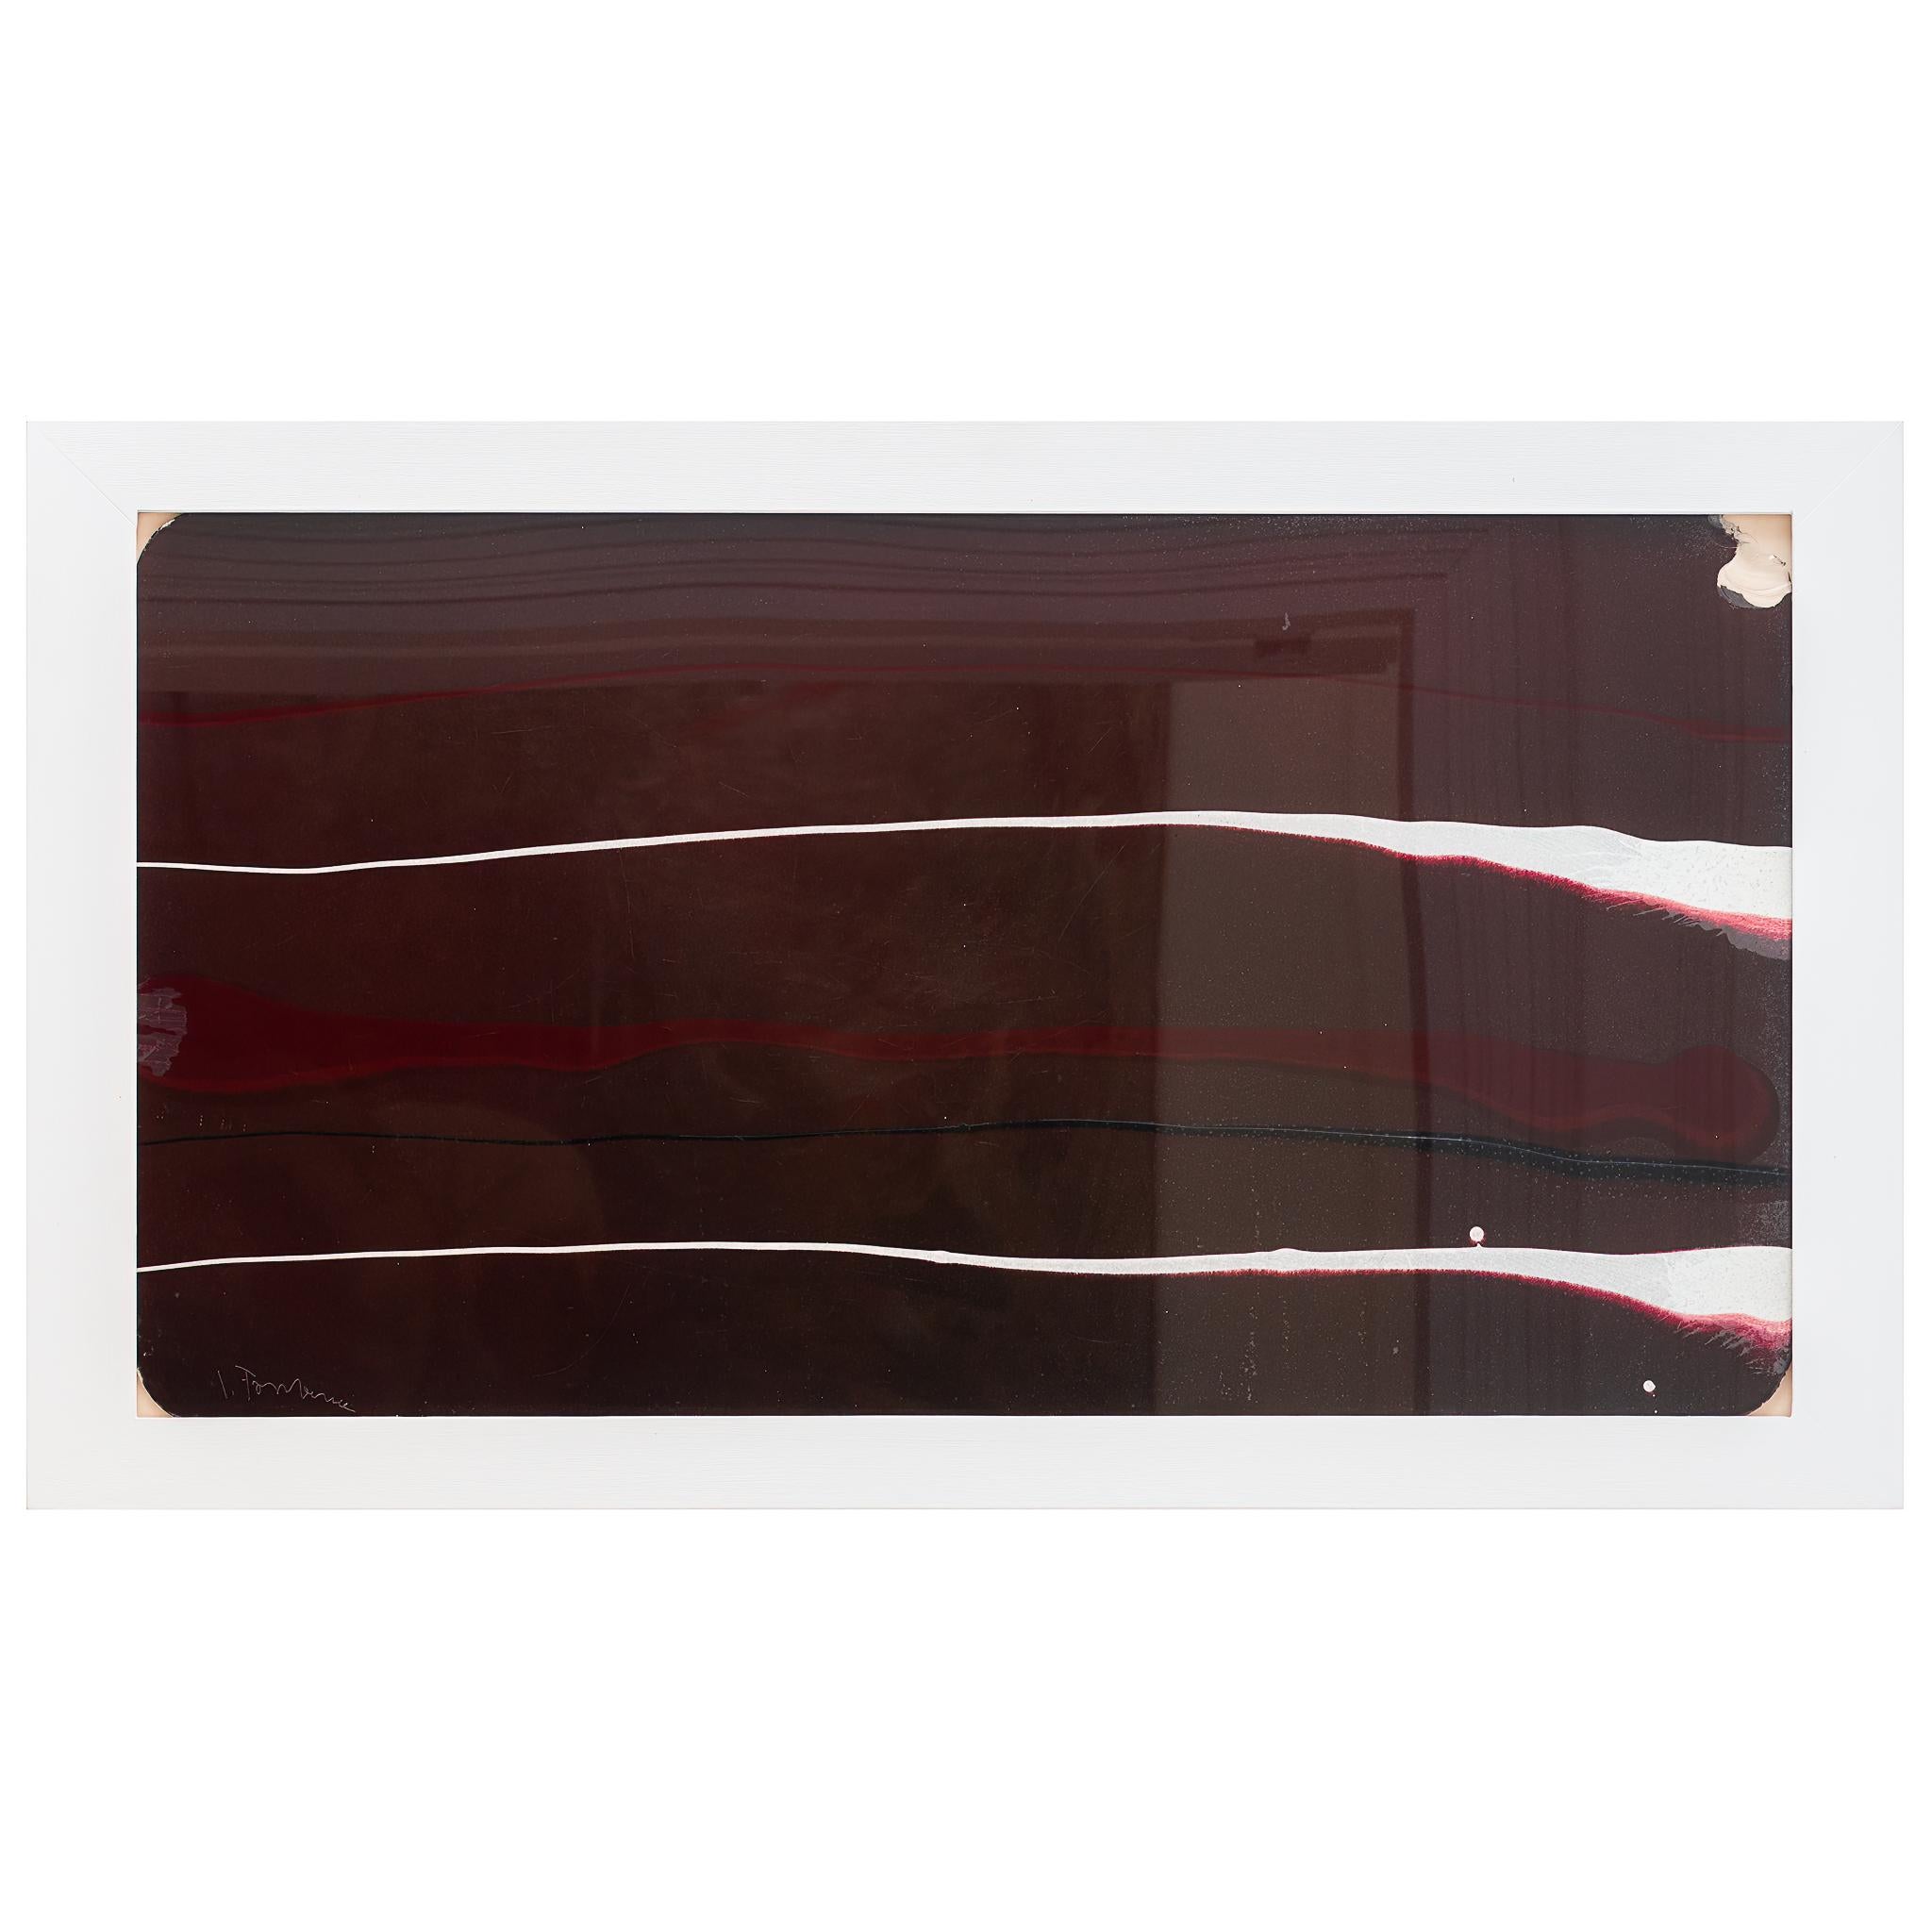 Lucio Fontana. 
Concetto Spaziale 1956

Oil and mixed media on glass.
withe, black  and and red stripes on colored glass
Measures: 58 X 108 cm (72 cm x 122 with frame).
signed L. Fontana

Sold with certification by Archivo Fontana, archived by